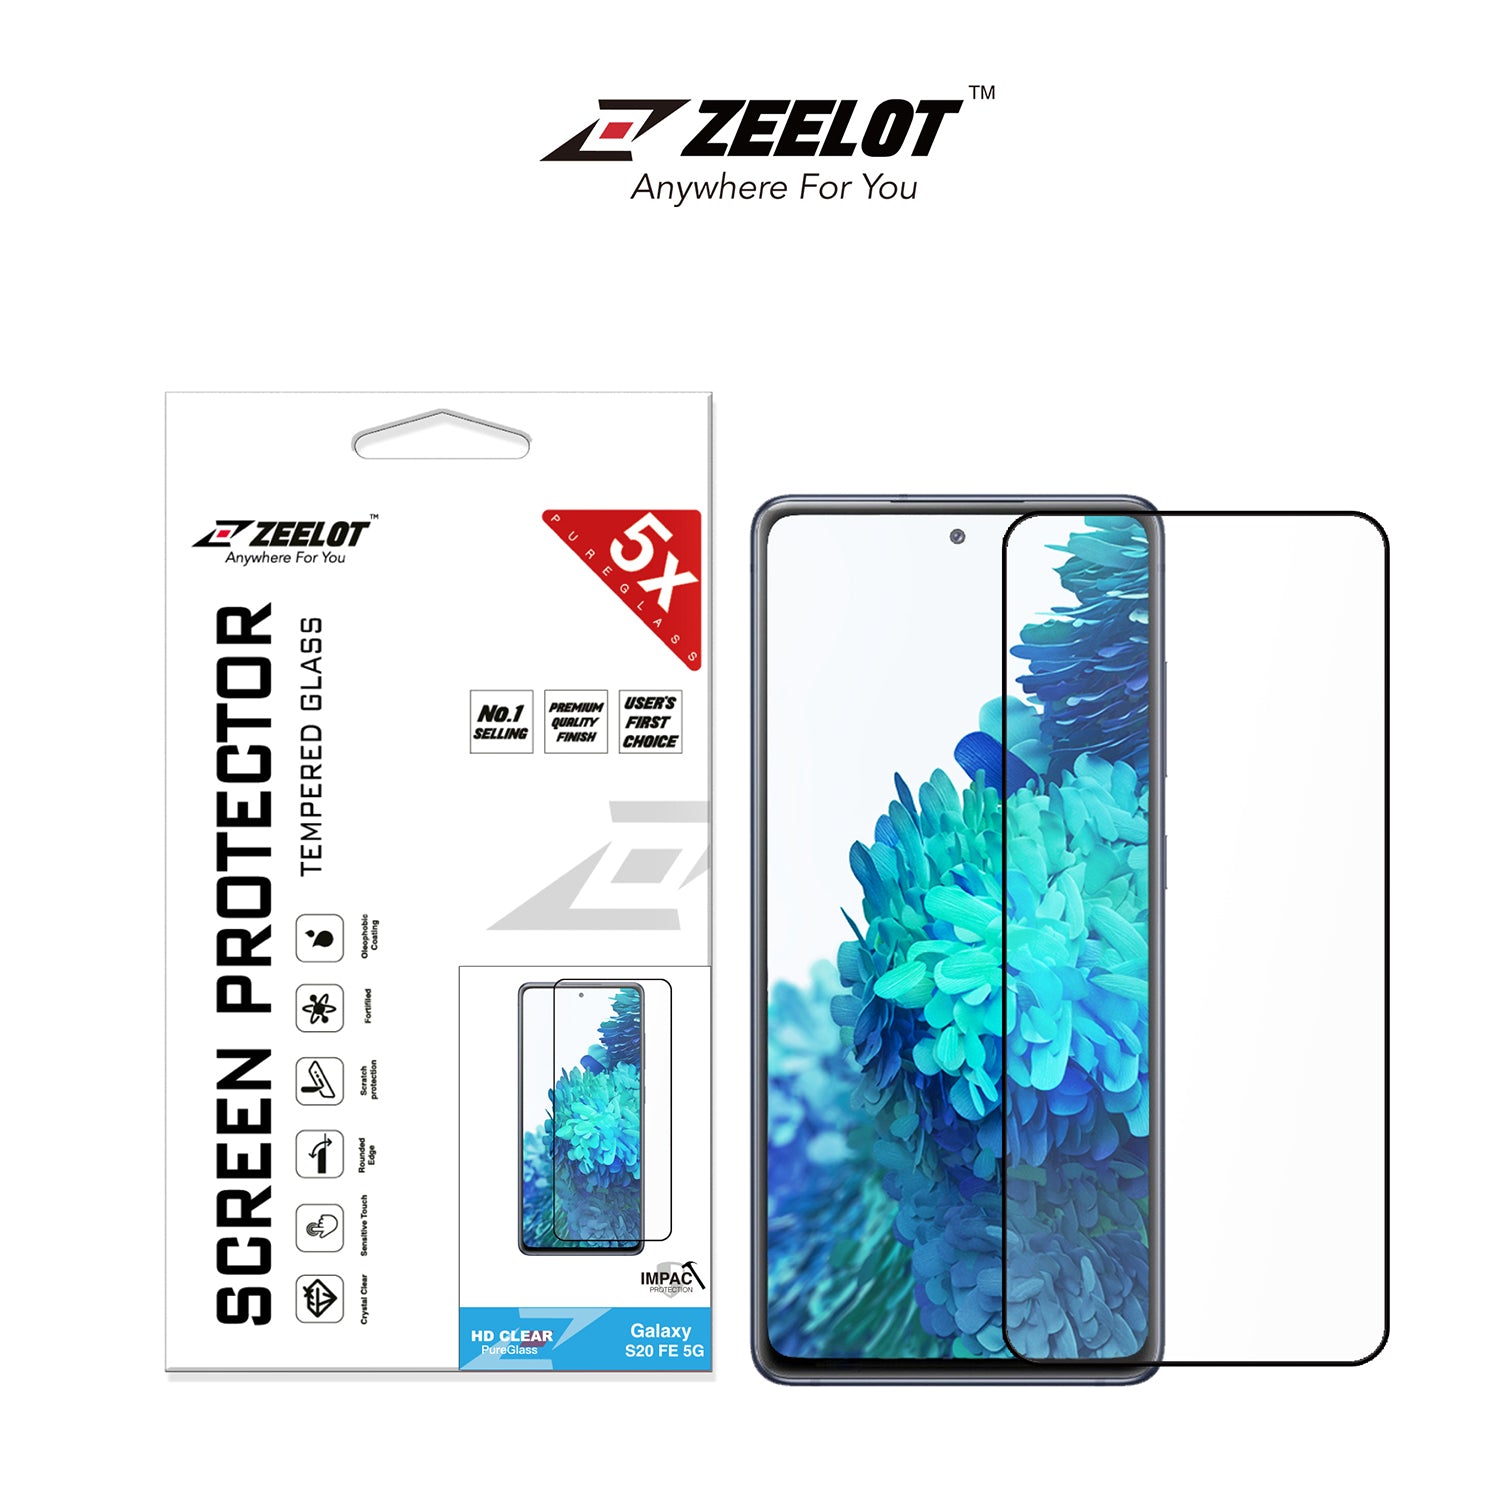 ZEELOT PureGlass 2.5D Tempered Glass Screen Protector for Samsung Galaxy S20 FE (2020), Clear Tempered Glass ZEELOT Clear 